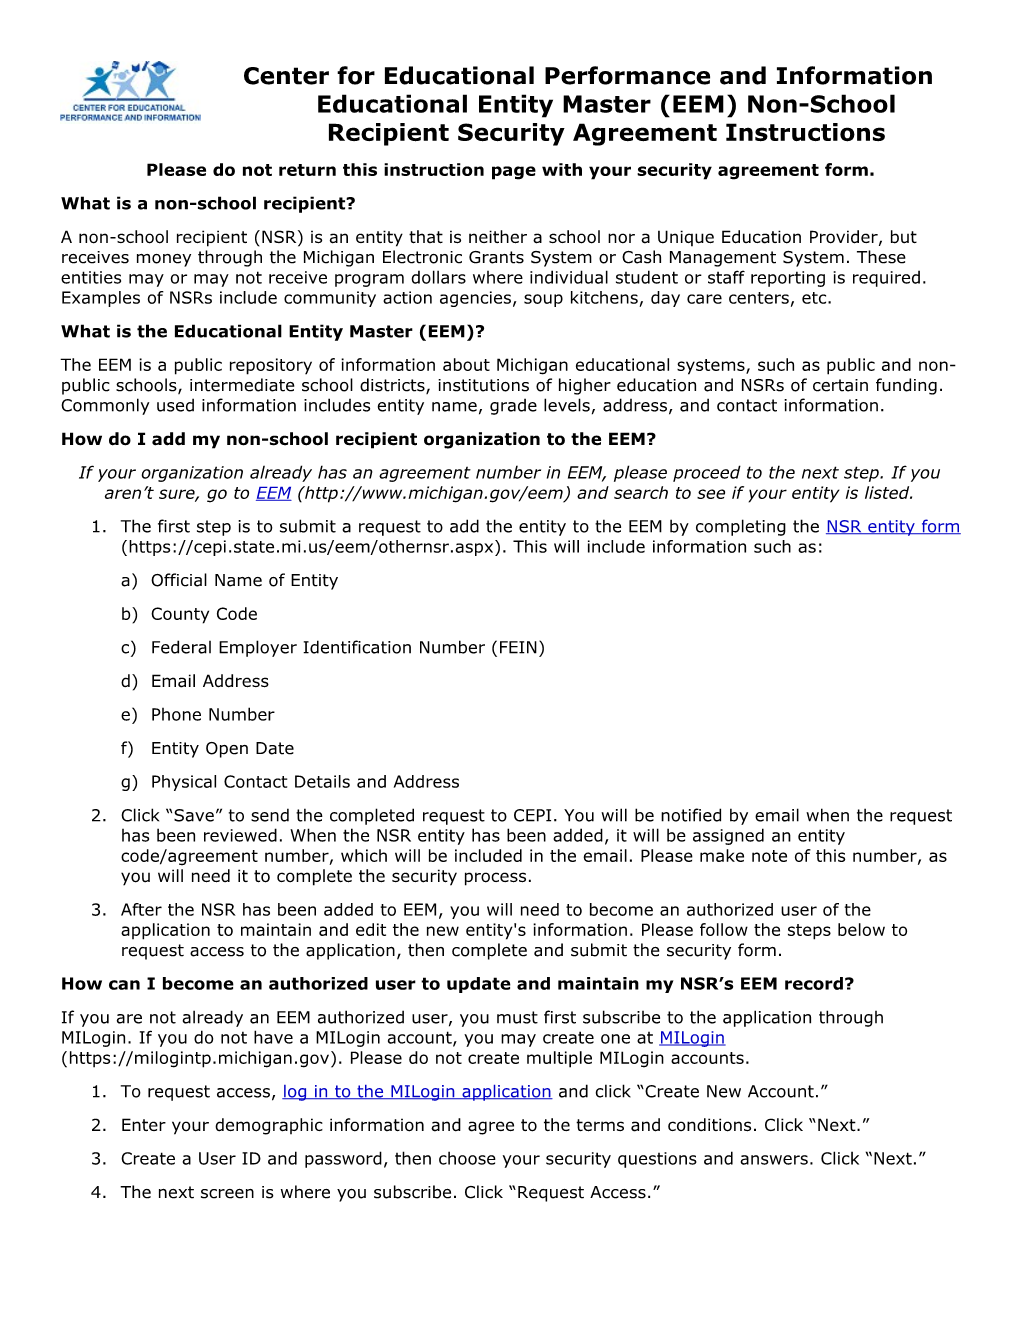 EEM Security Agreement Form